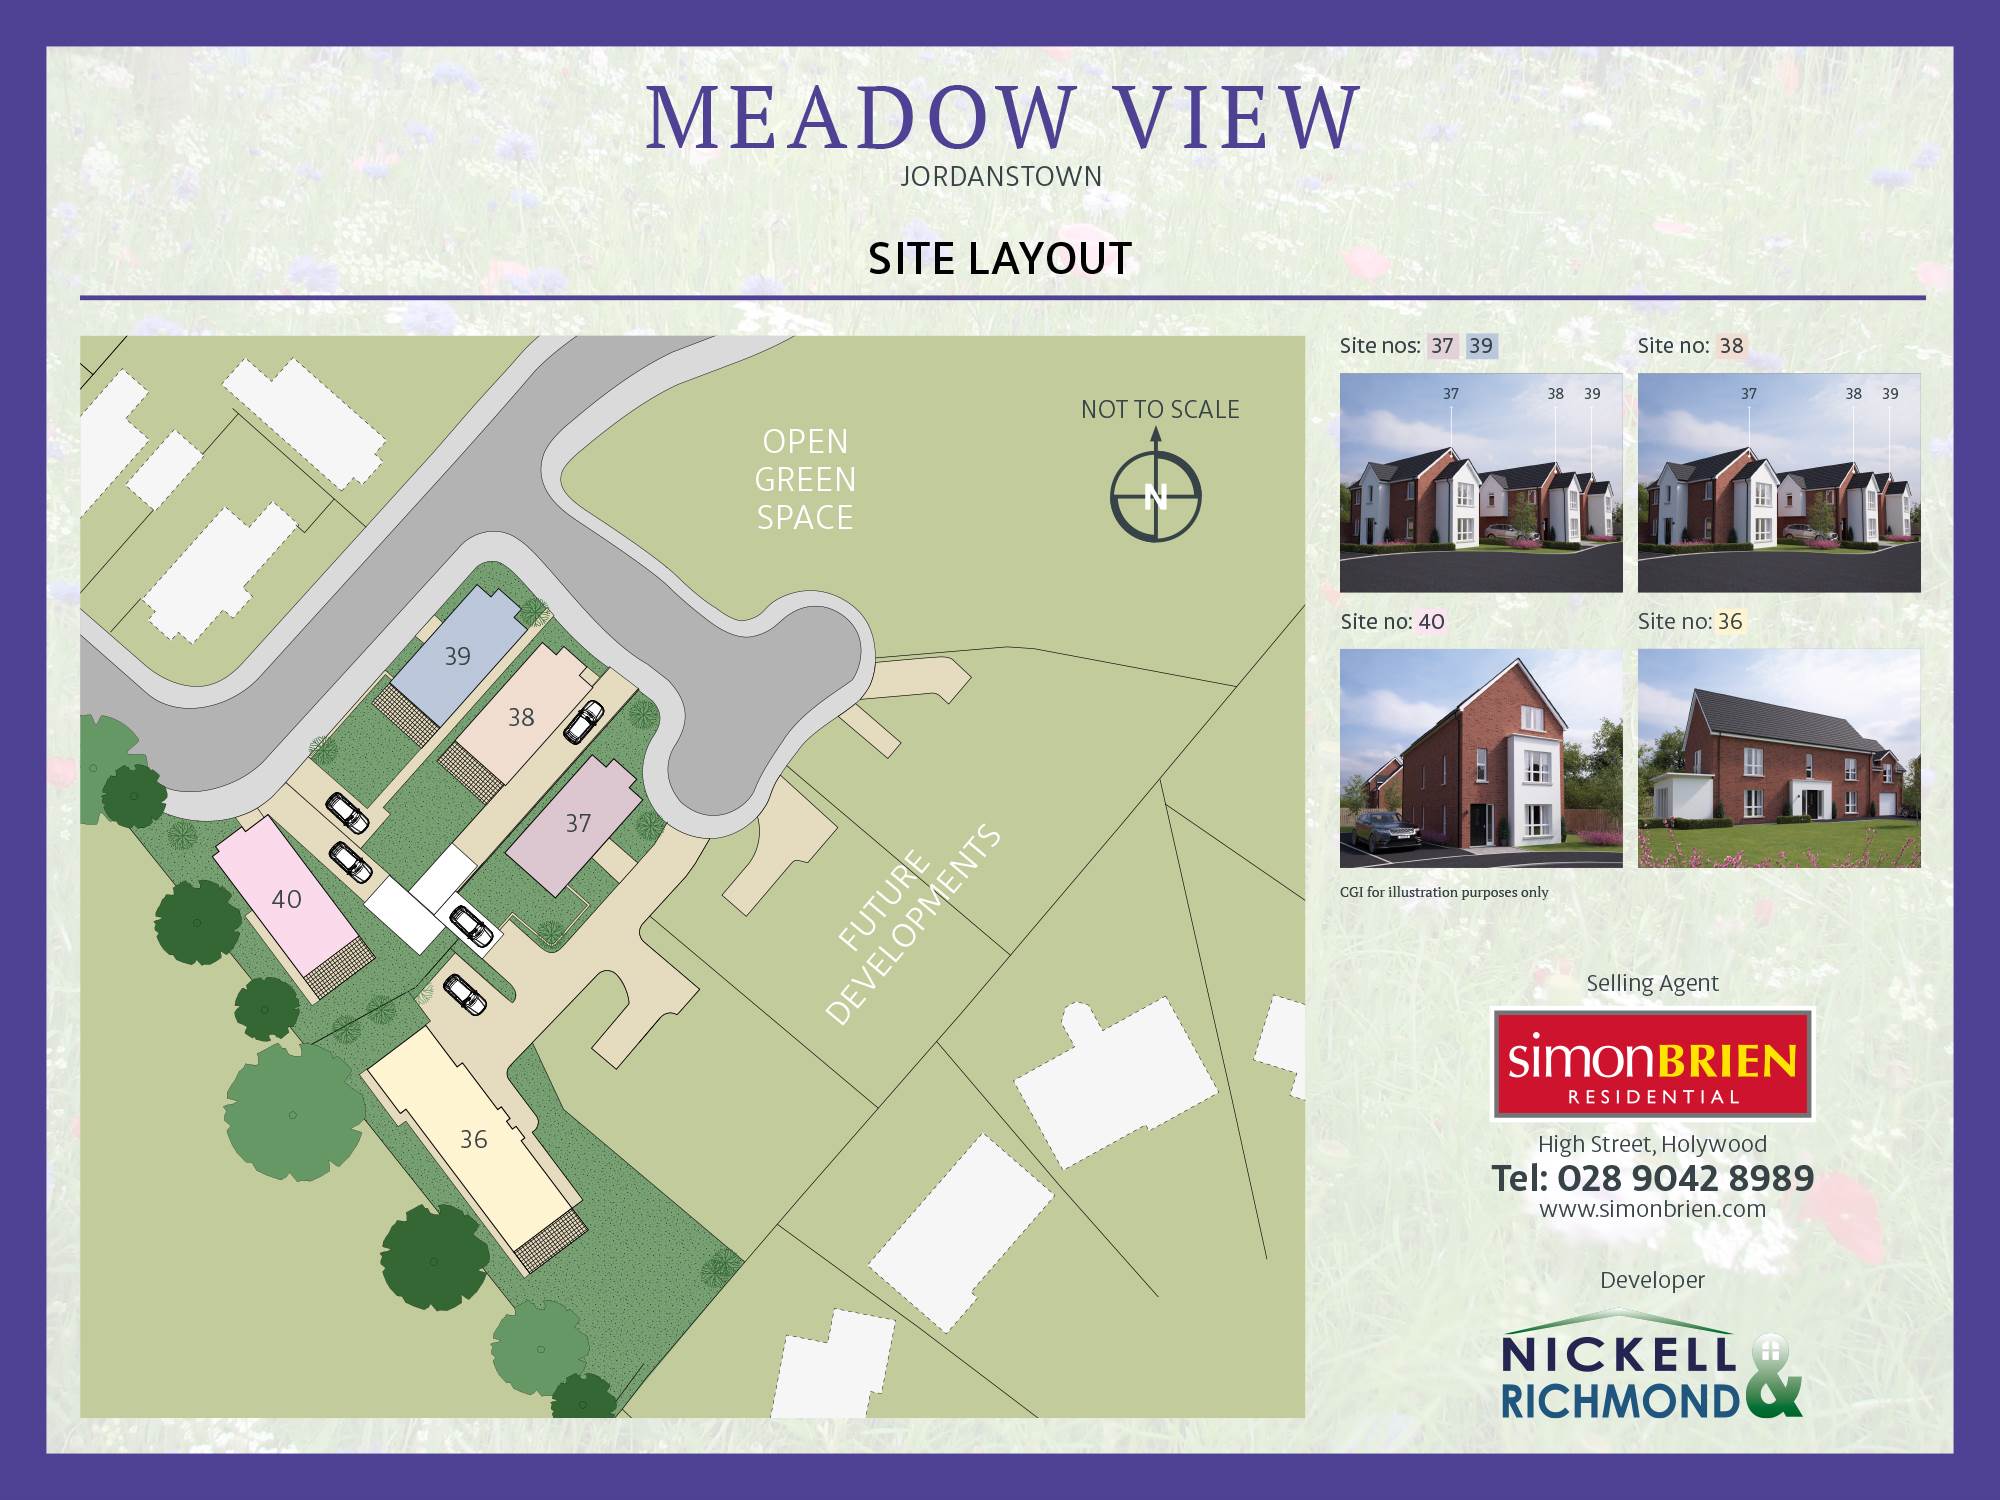 36 Meadow View